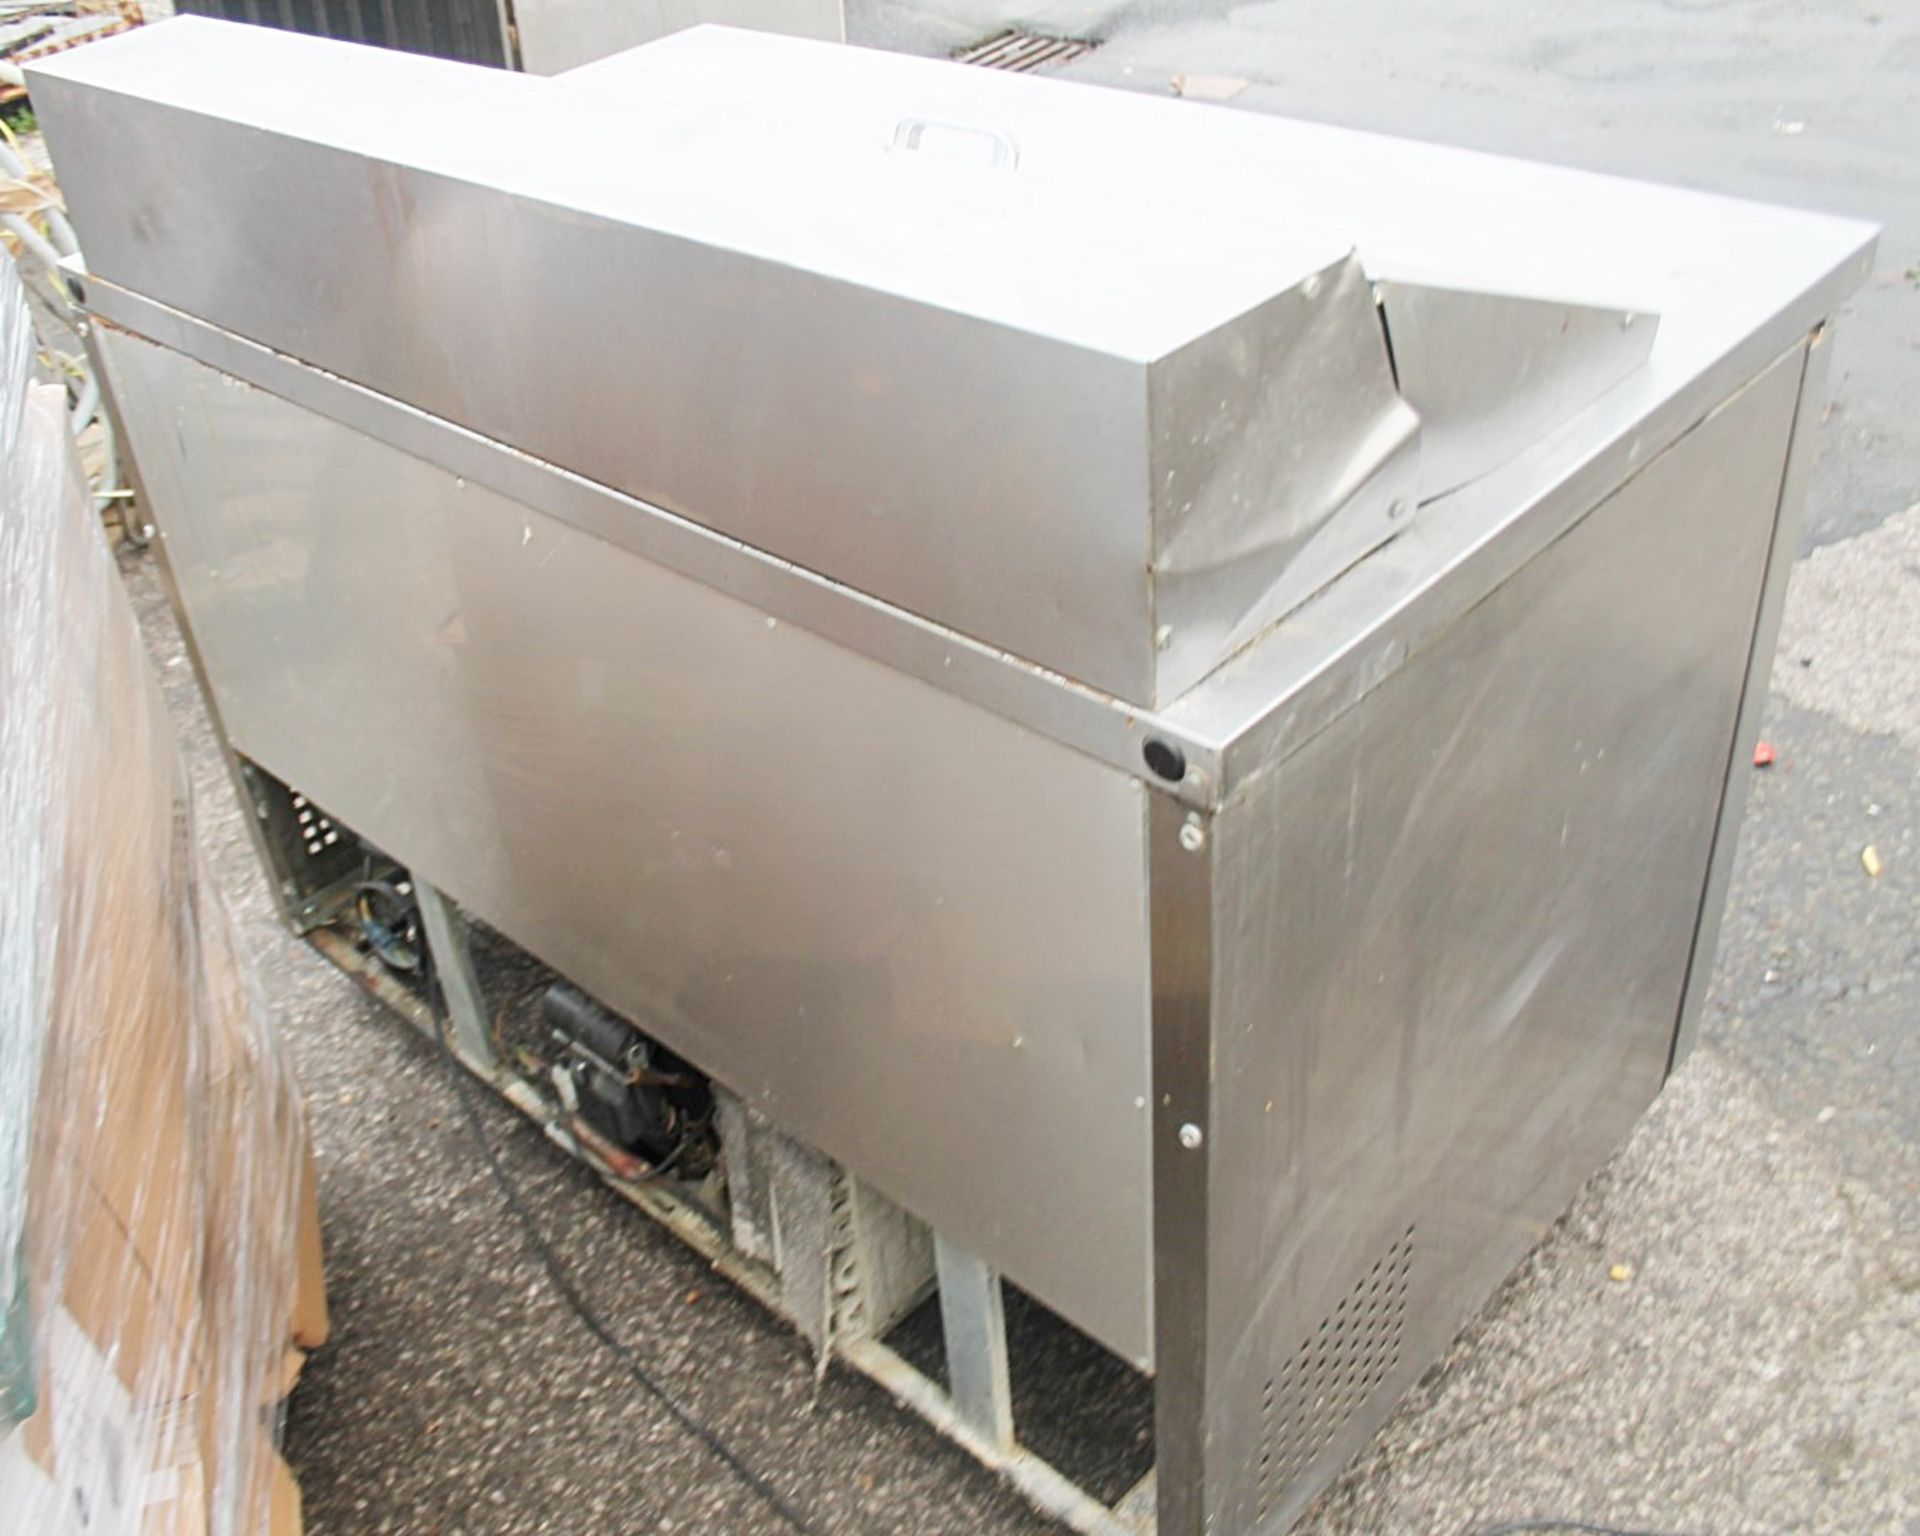 1 x Commercial Refrigerated Counter In Stainless Steel - Ref: GEN764 WH2 - CL811 BEL - Location: - Image 7 of 7